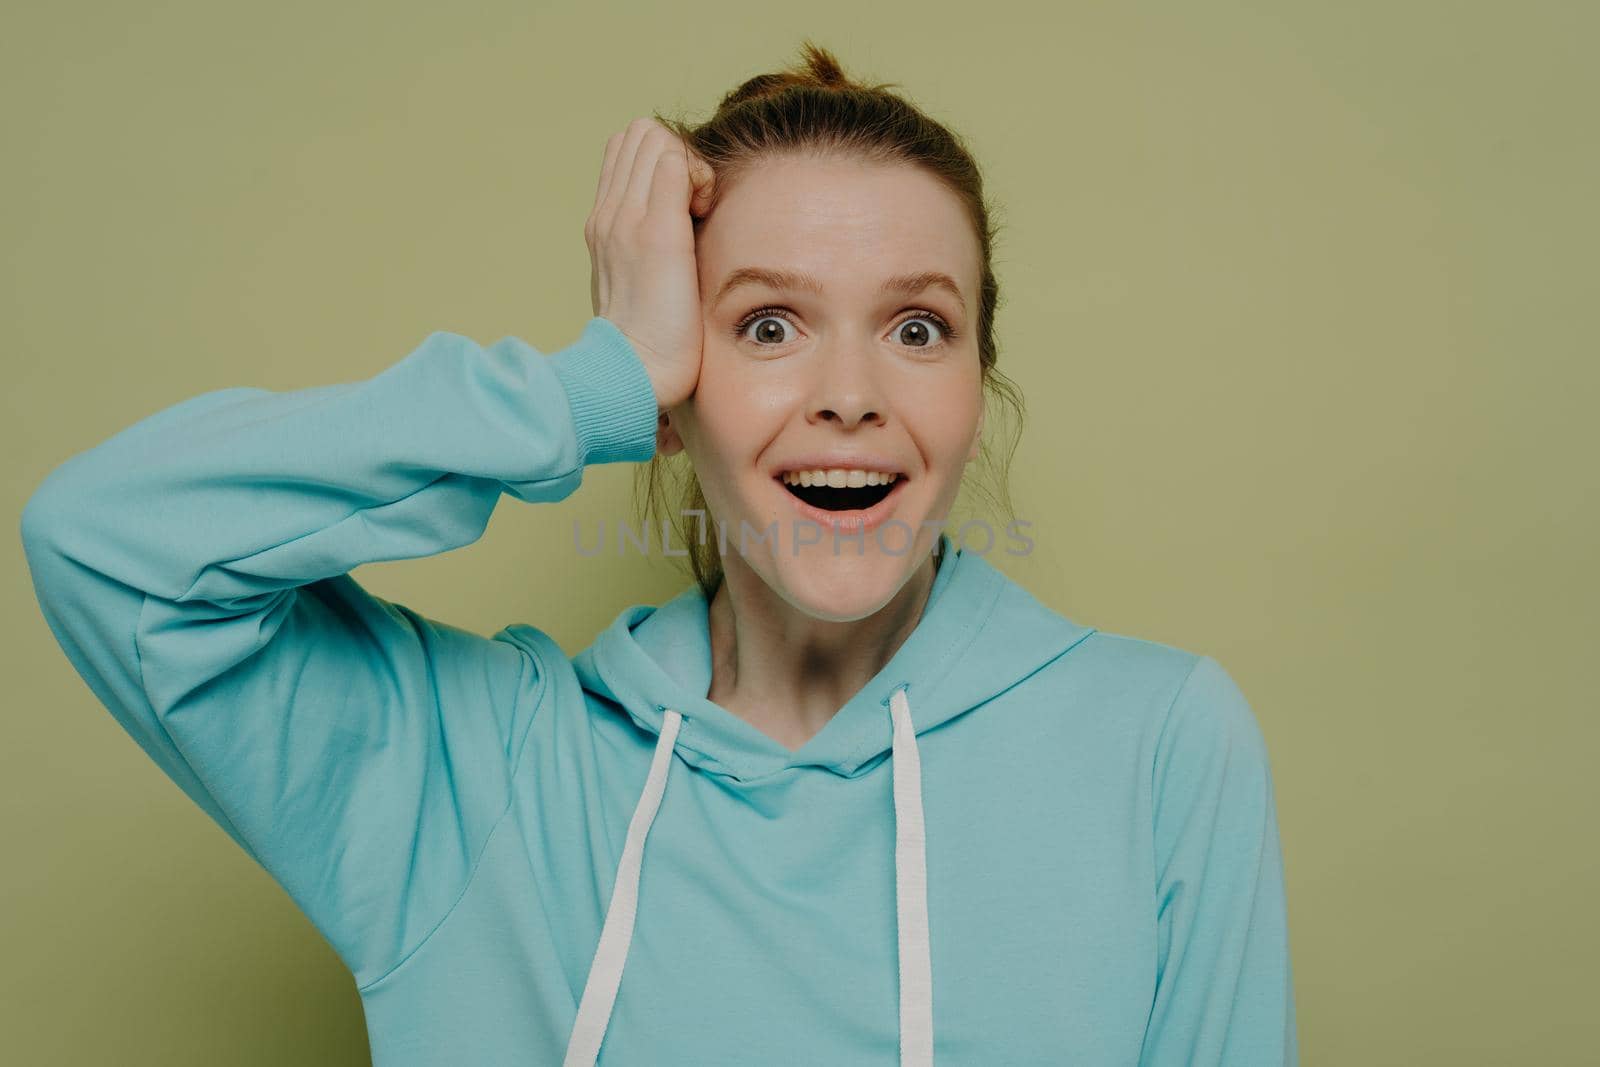 Surprised young woman without makeup demonstrating shock and excitement holding hand at head looking at camera wearing casual blue hooded sweater while posing in studio. Human emotions concept